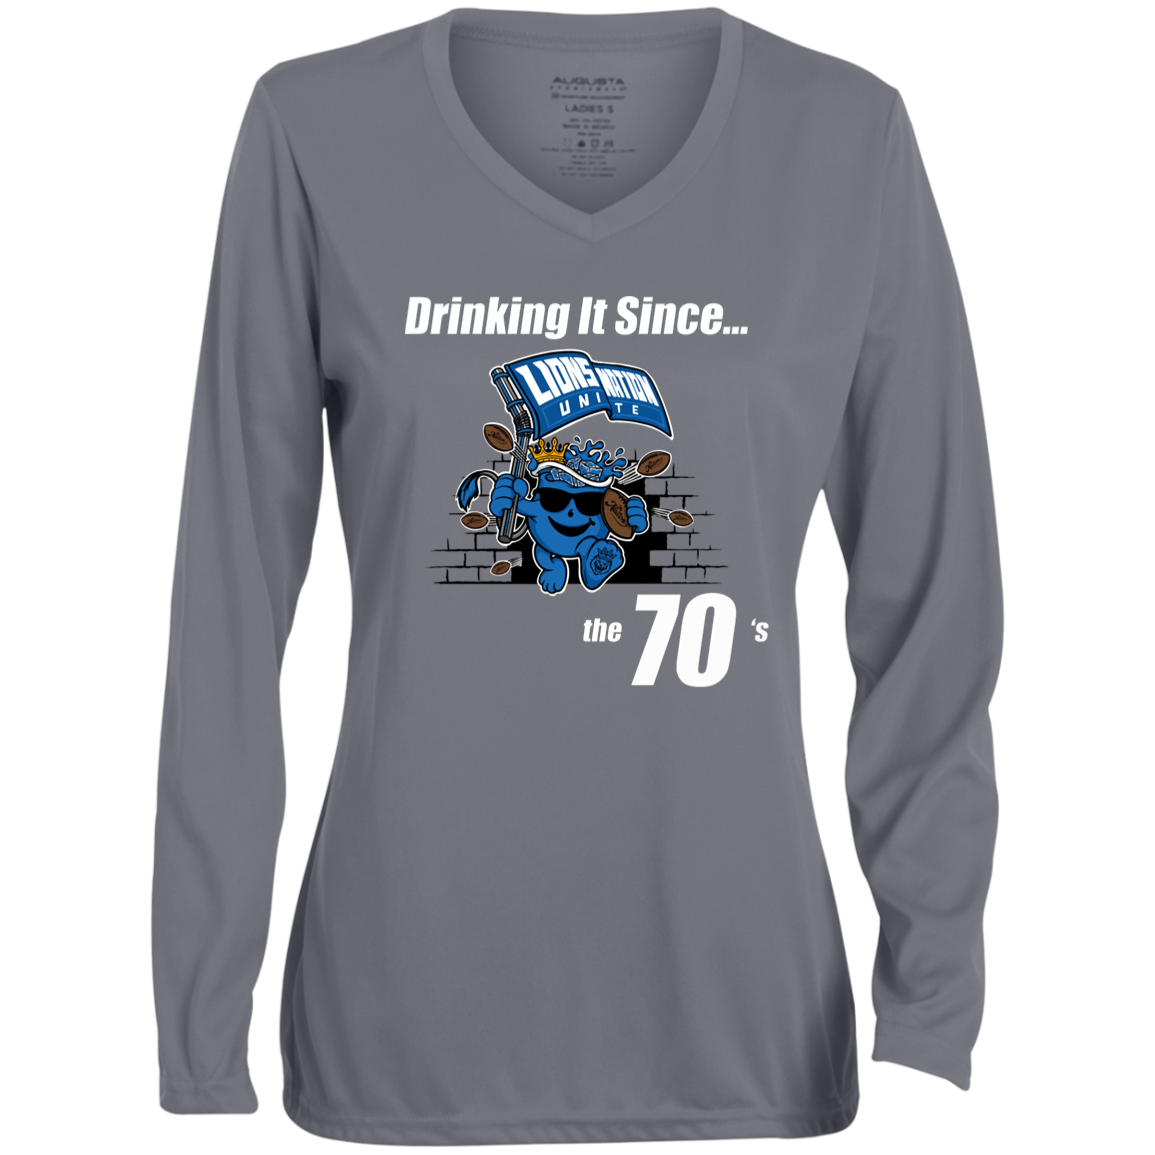 Drinking It Since the 70's Women's Long-Sleeved T-Shirt